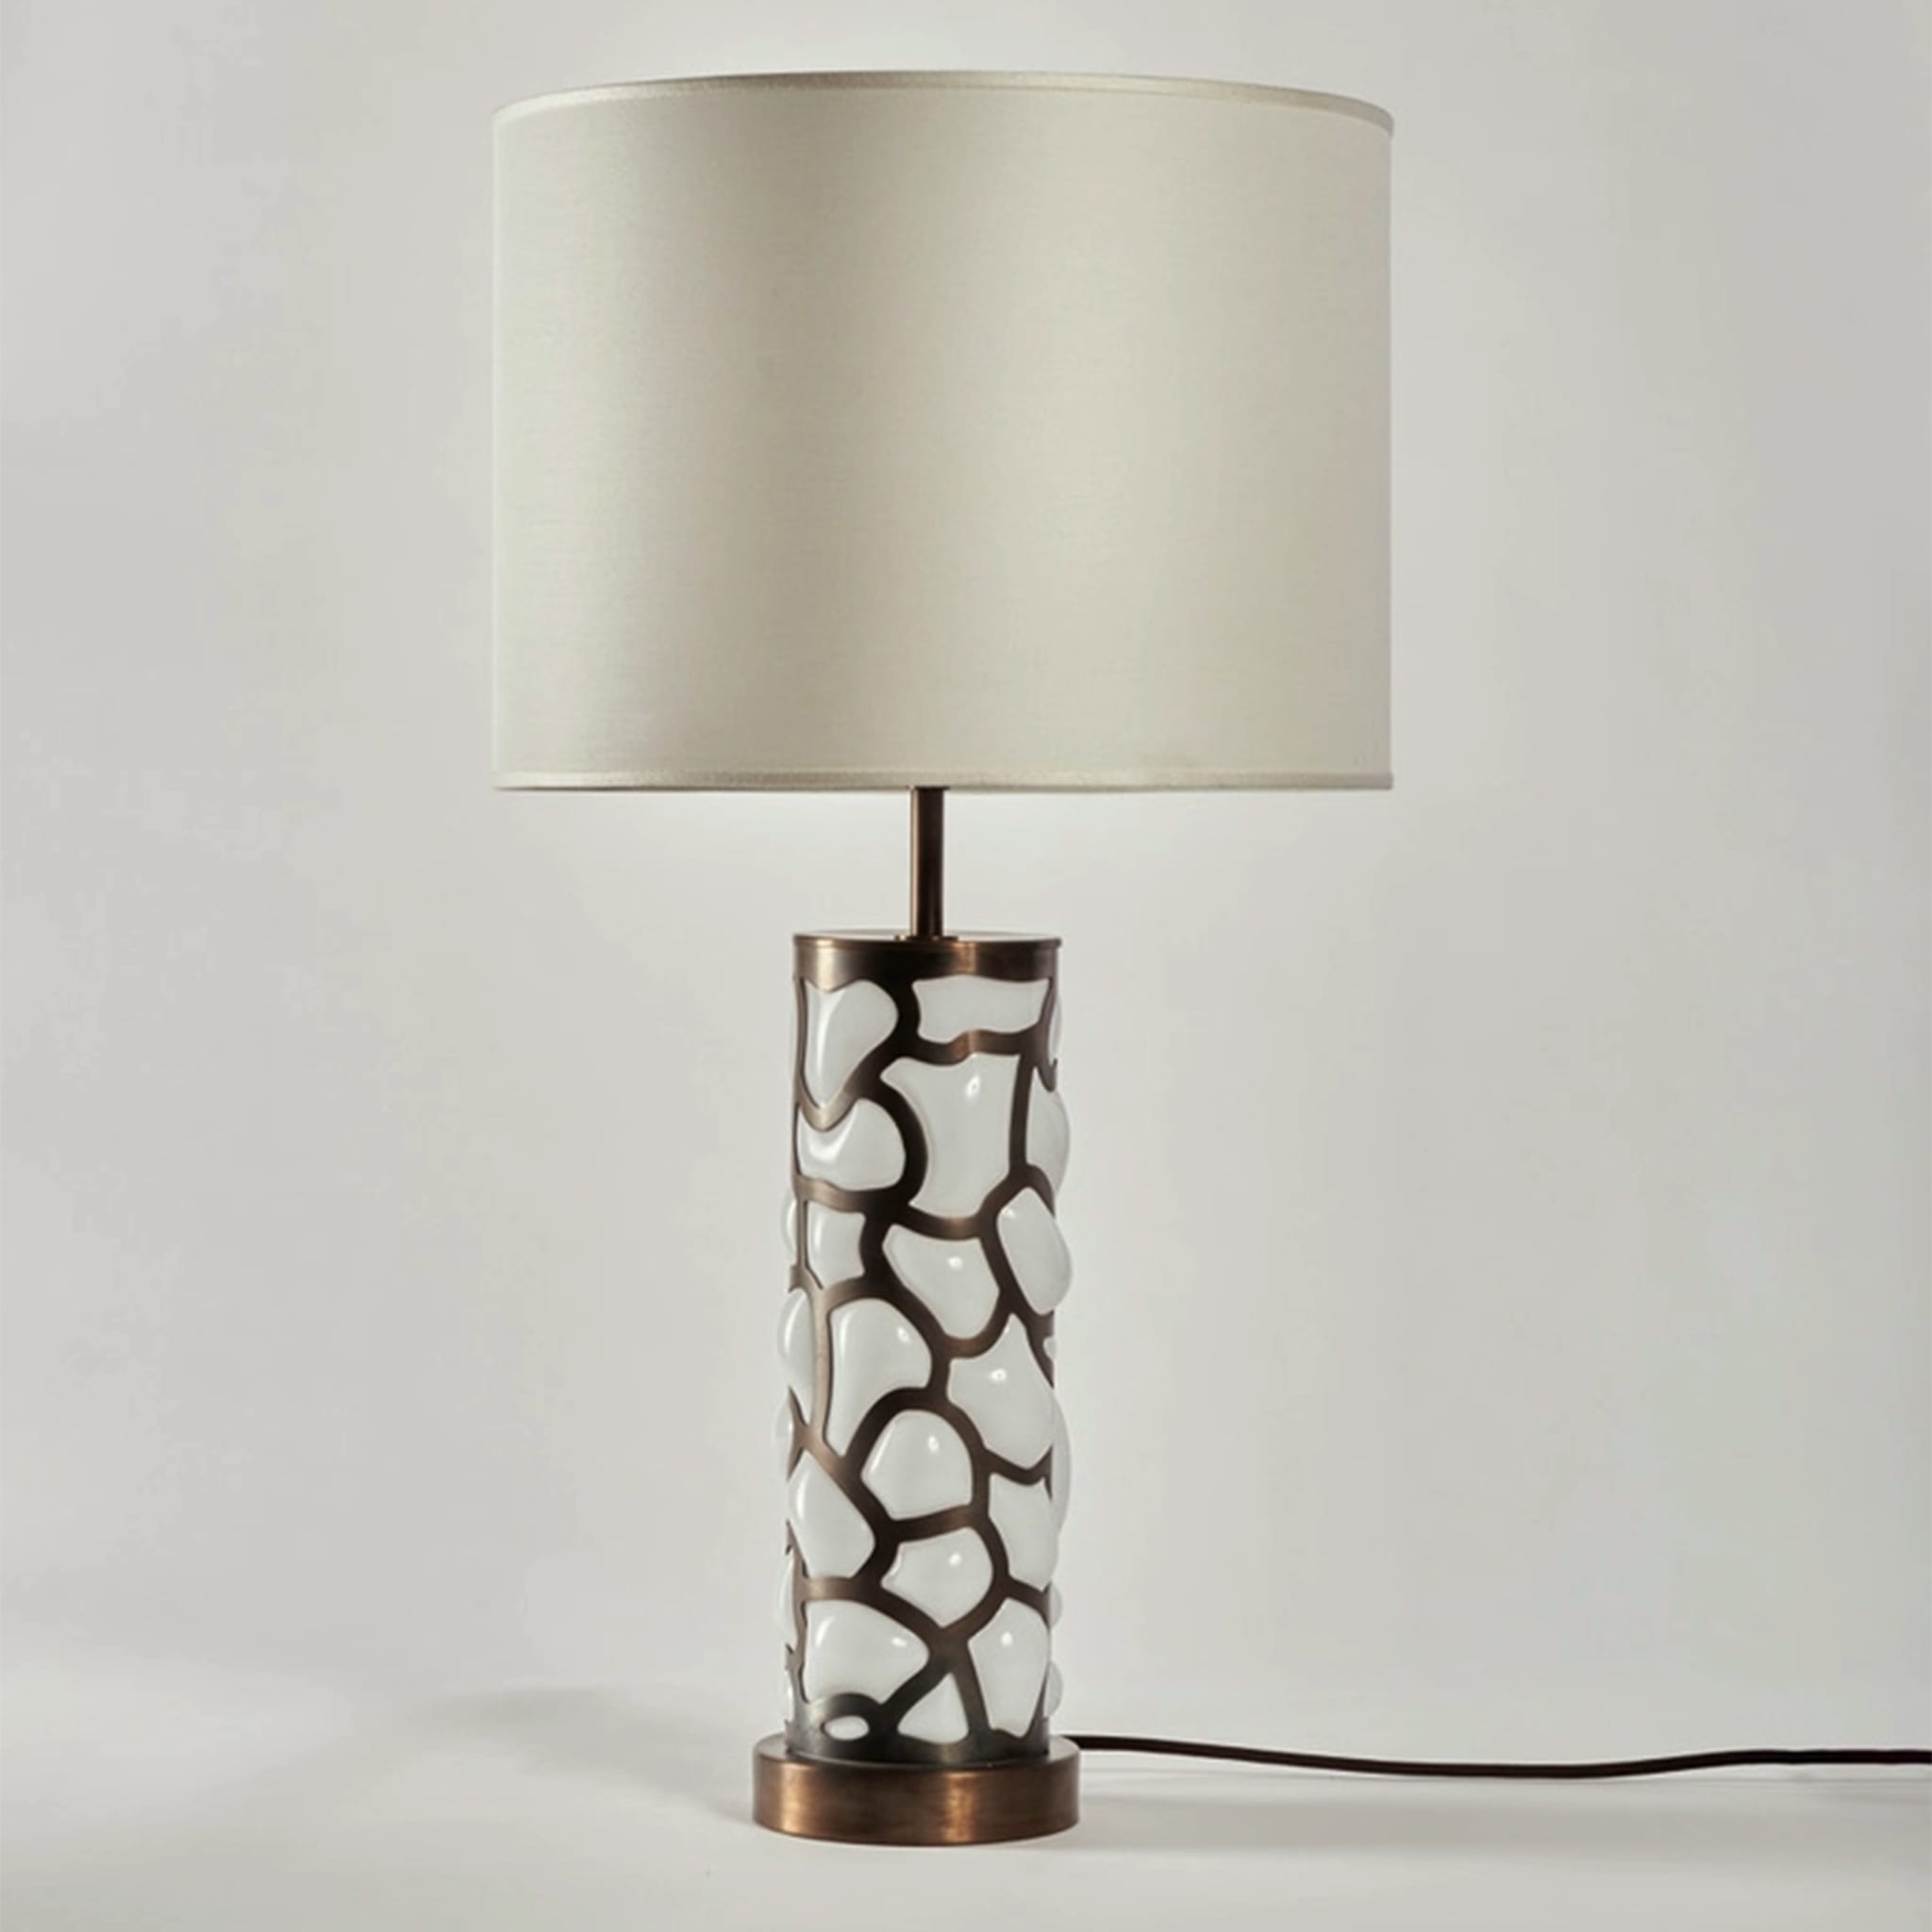 "Blown Clouds" Table Lamp in White Murano Glass and Bronze - Alternative view 2